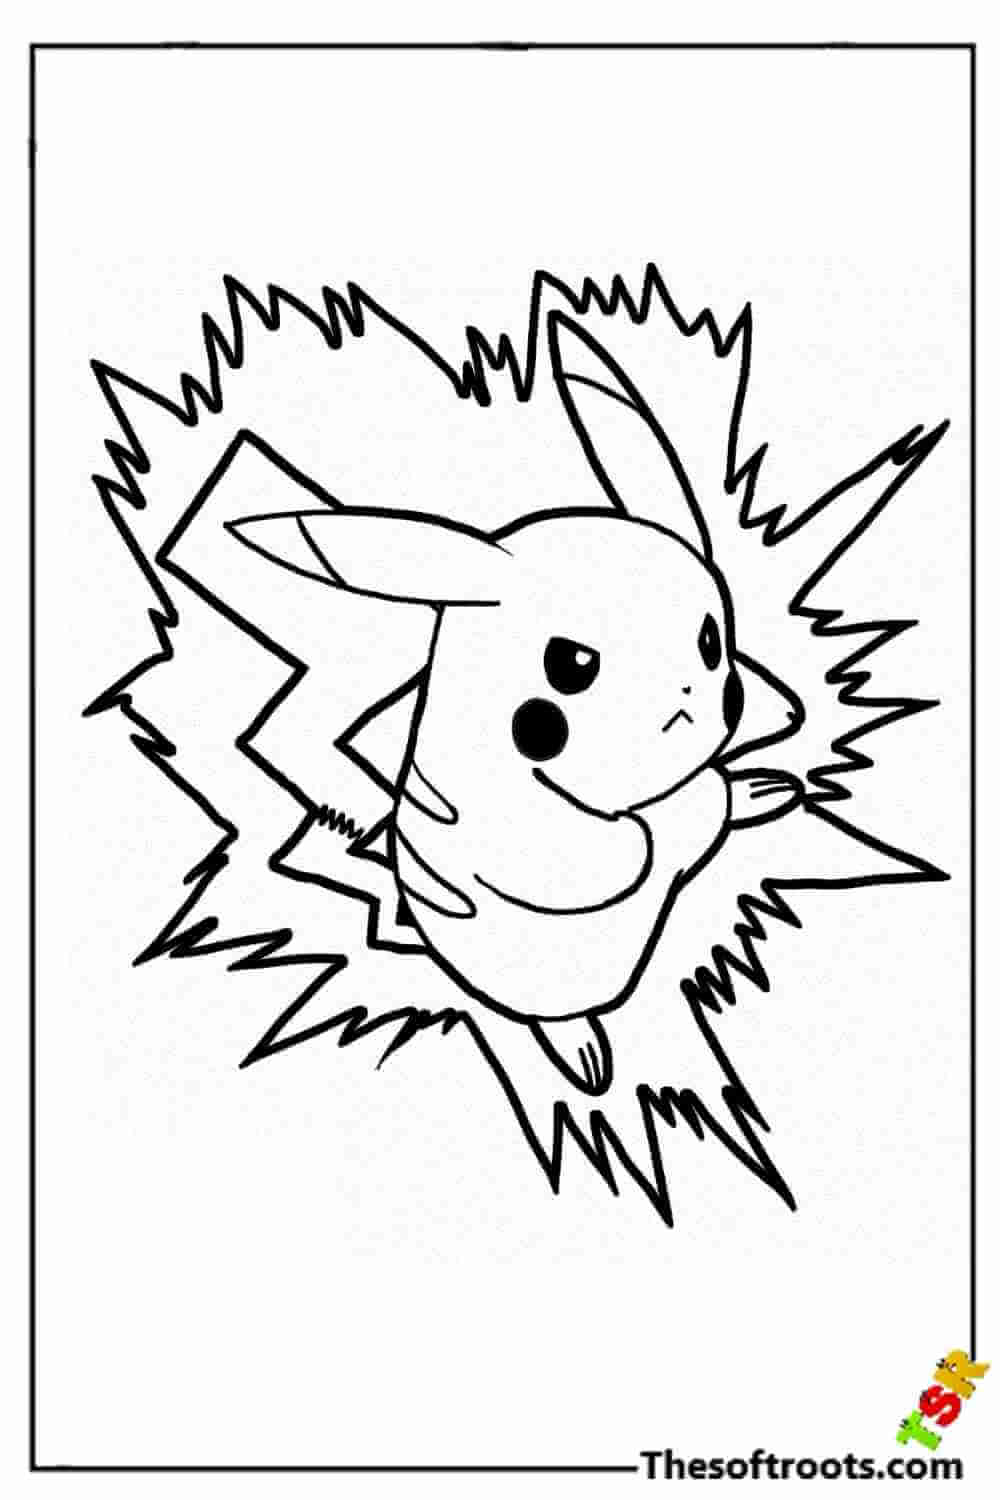 Angry Pikachu coloring pages